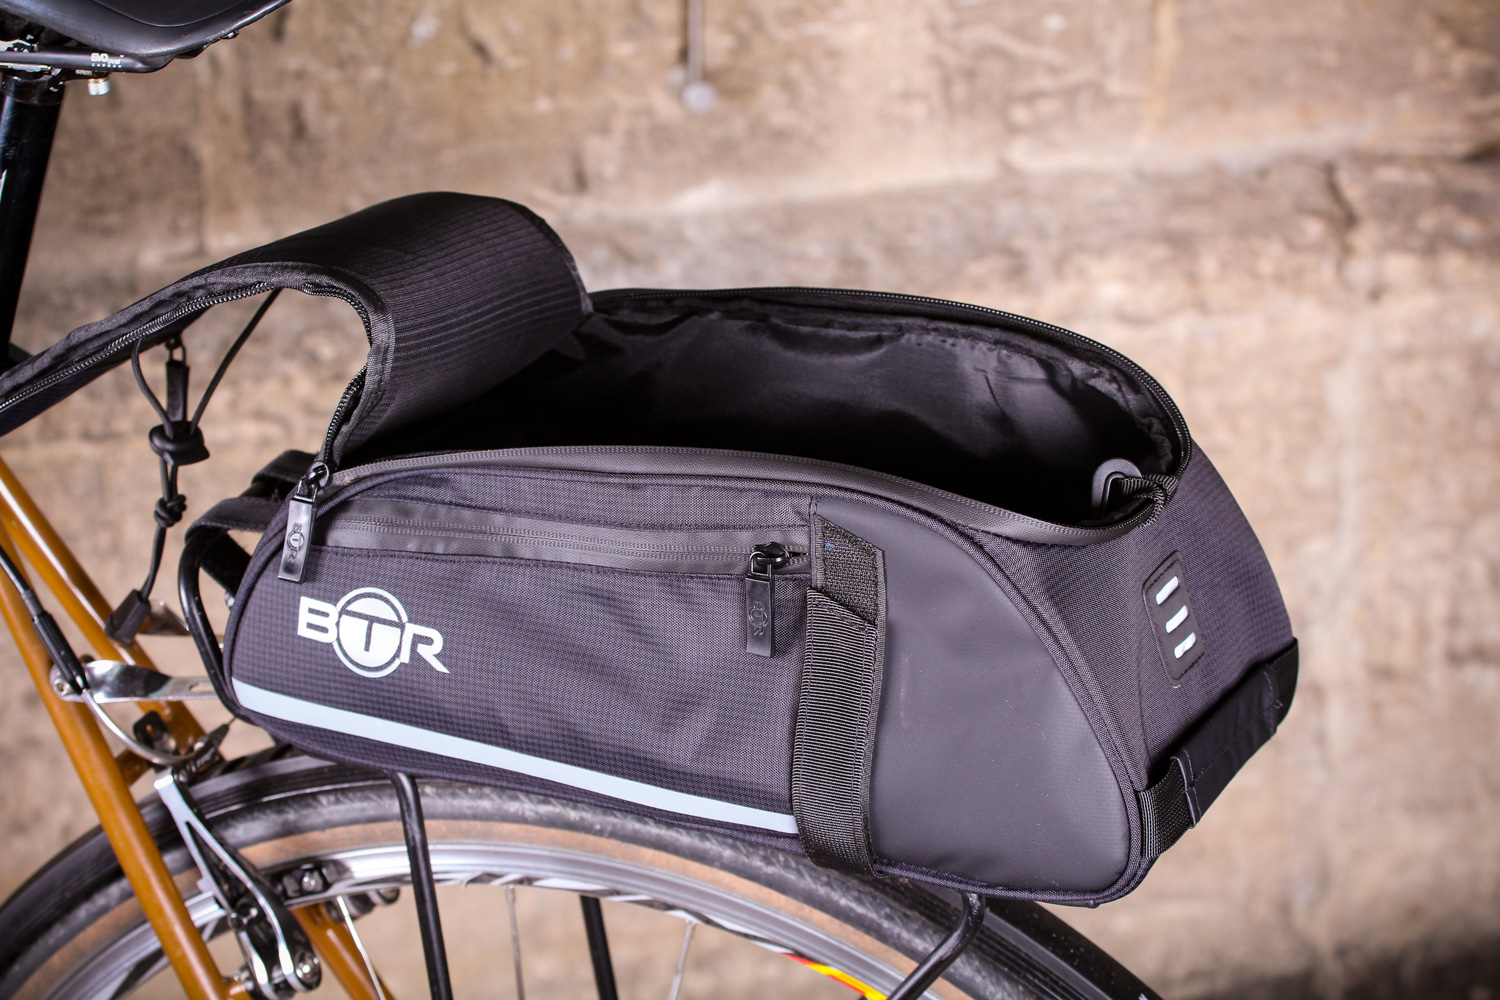 waterproof pouch for cycling